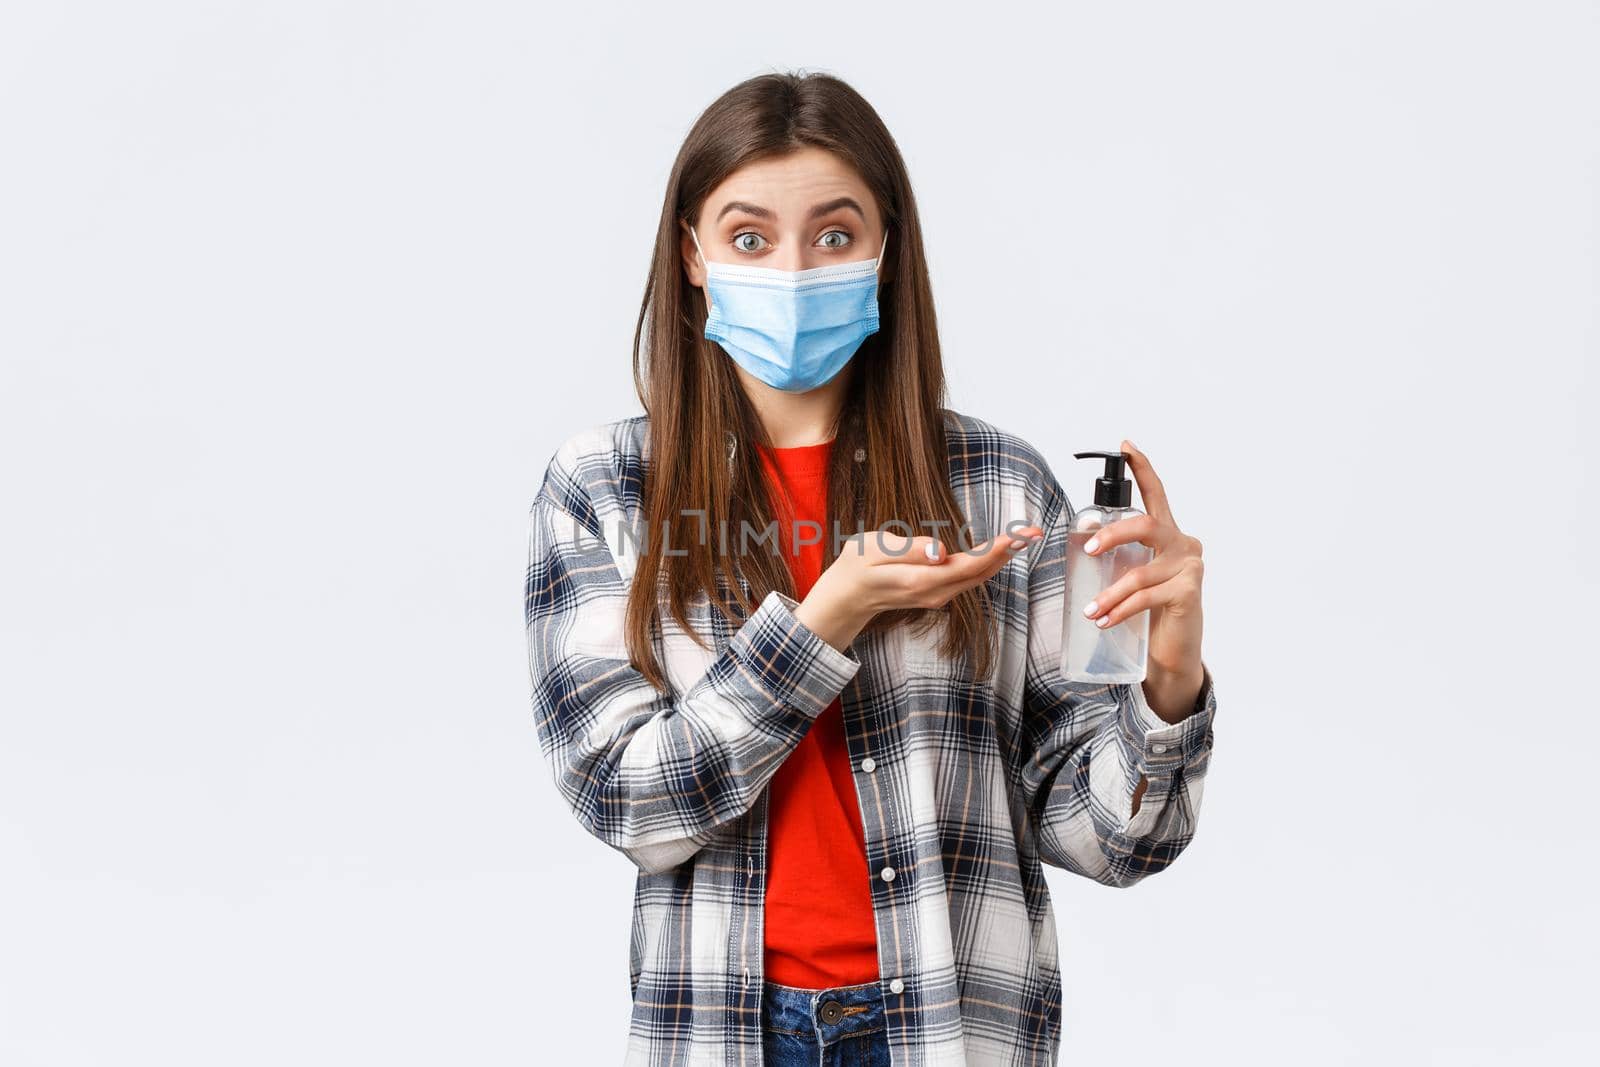 Coronavirus outbreak, leisure on quarantine, social distancing and emotions concept. Smiling girl preventing catching virus, wear medical mask and apply hand sanitizer, white background.